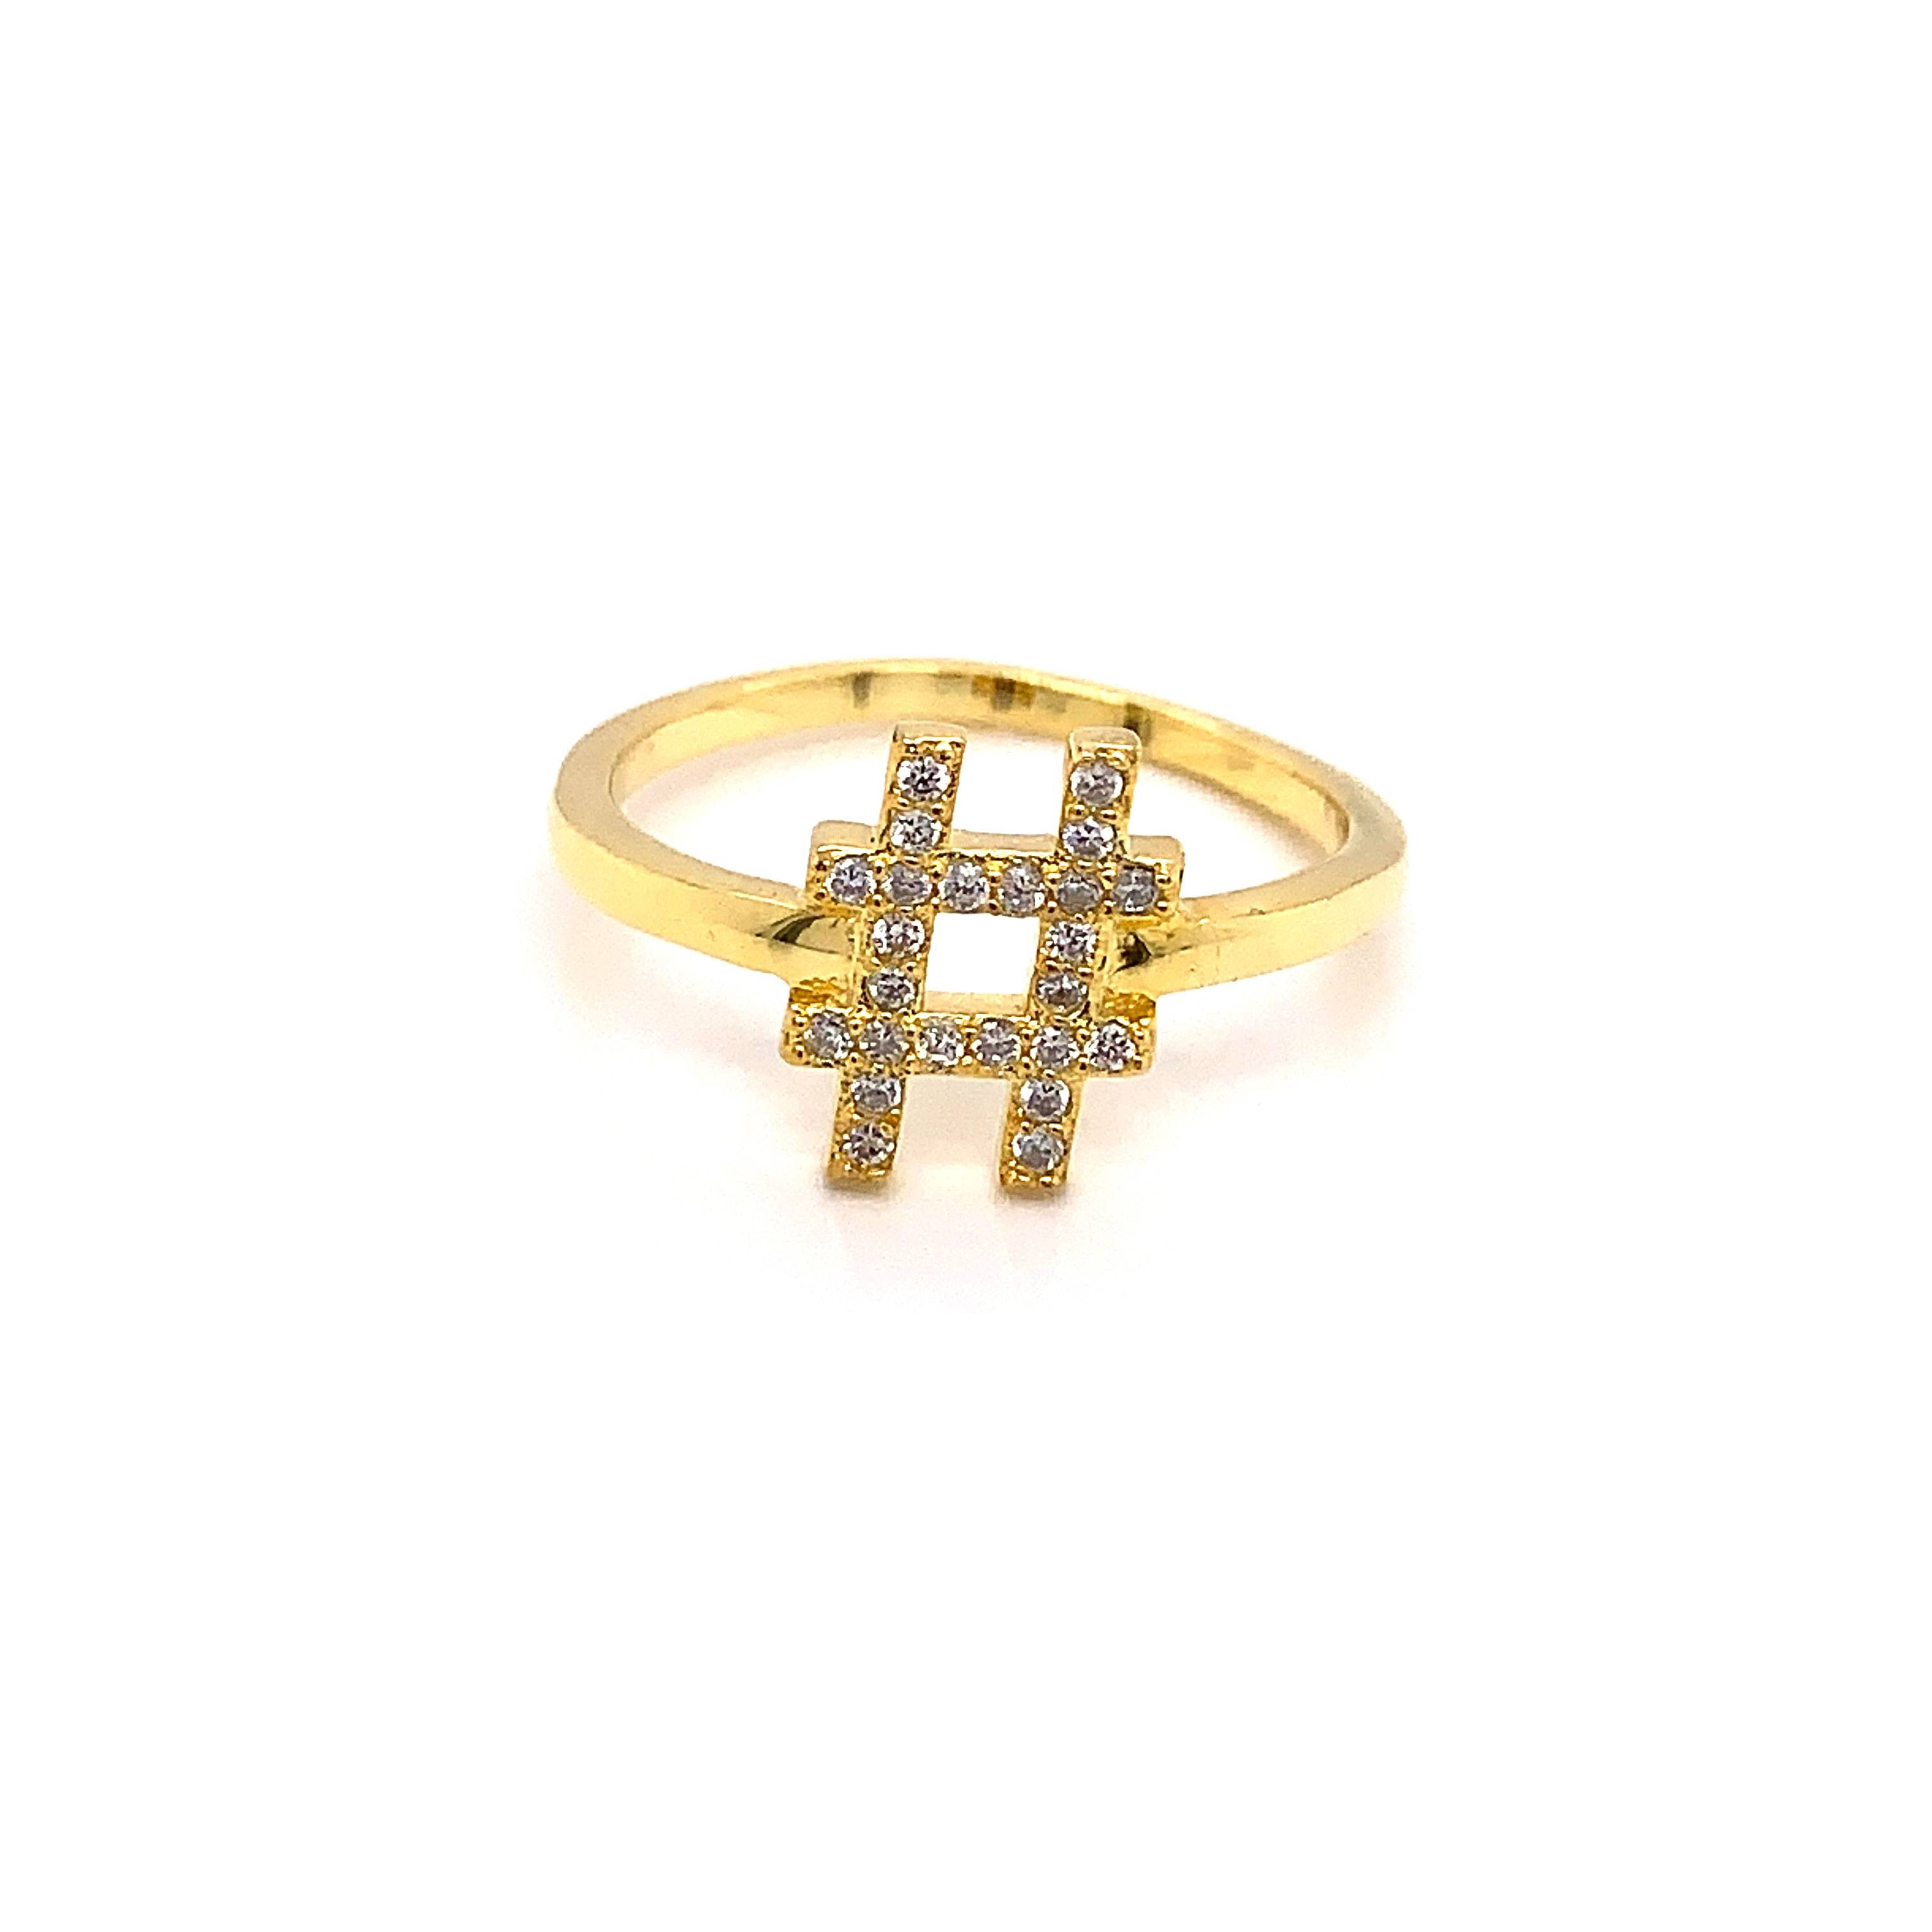 # Ring - Gold Plated